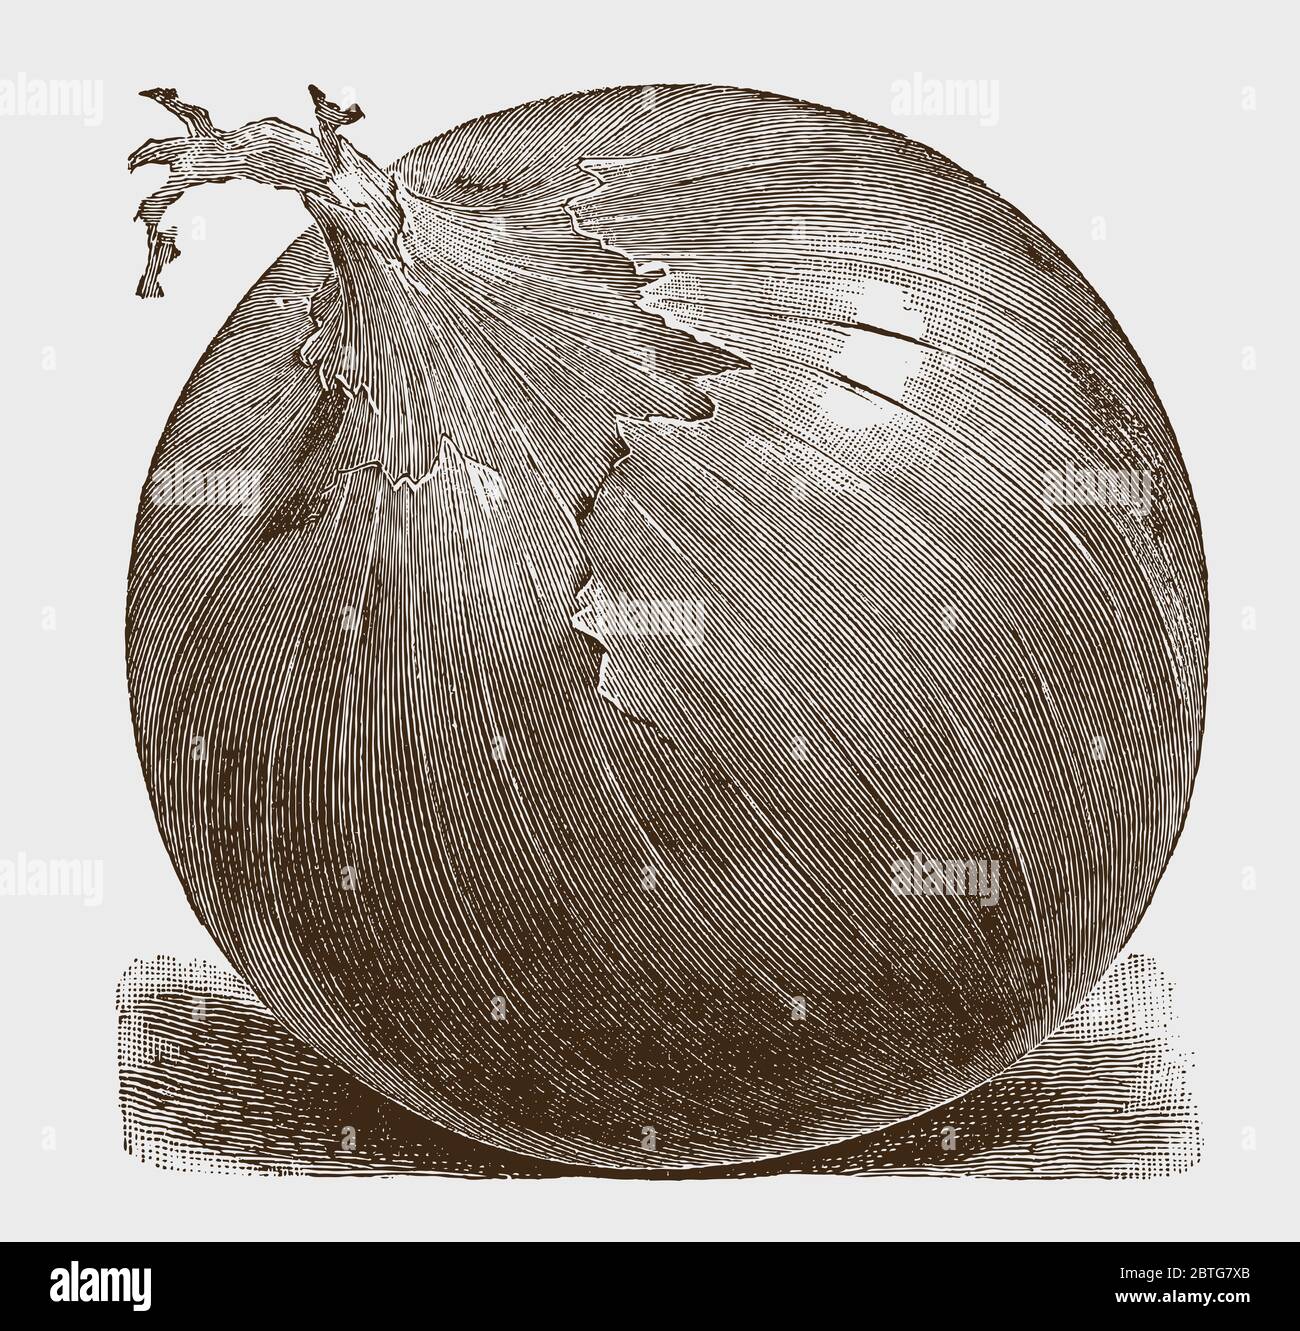 Round onion in three-quarter perspective, lying slightly tilted to the side, after a historical engraving from the early 20th century Stock Vector